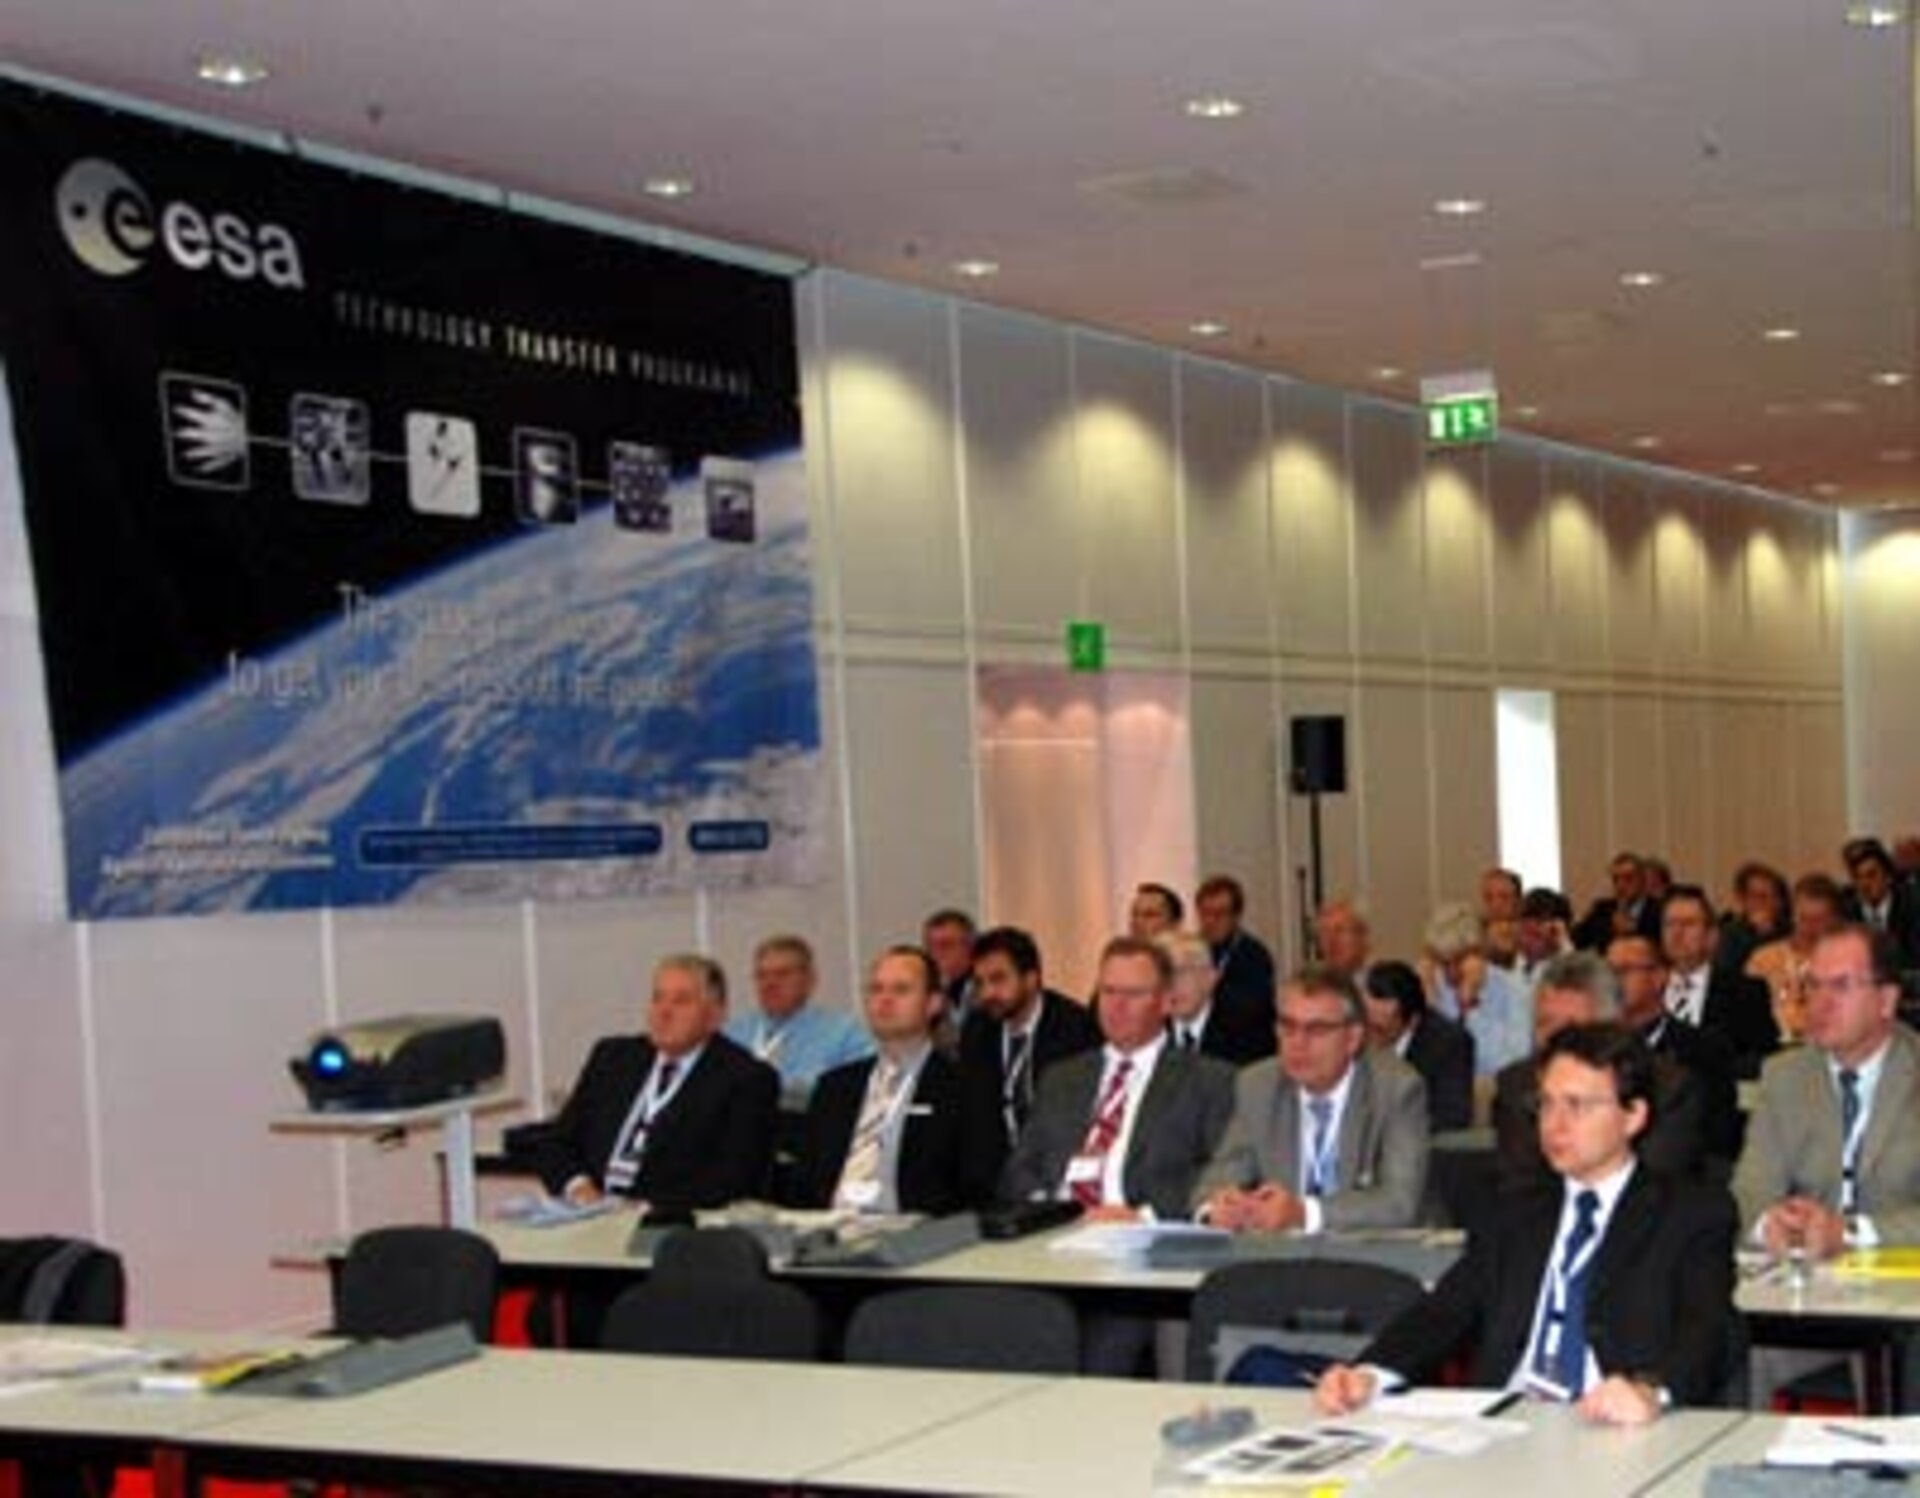 European Space Technology Transfer Conference 2007